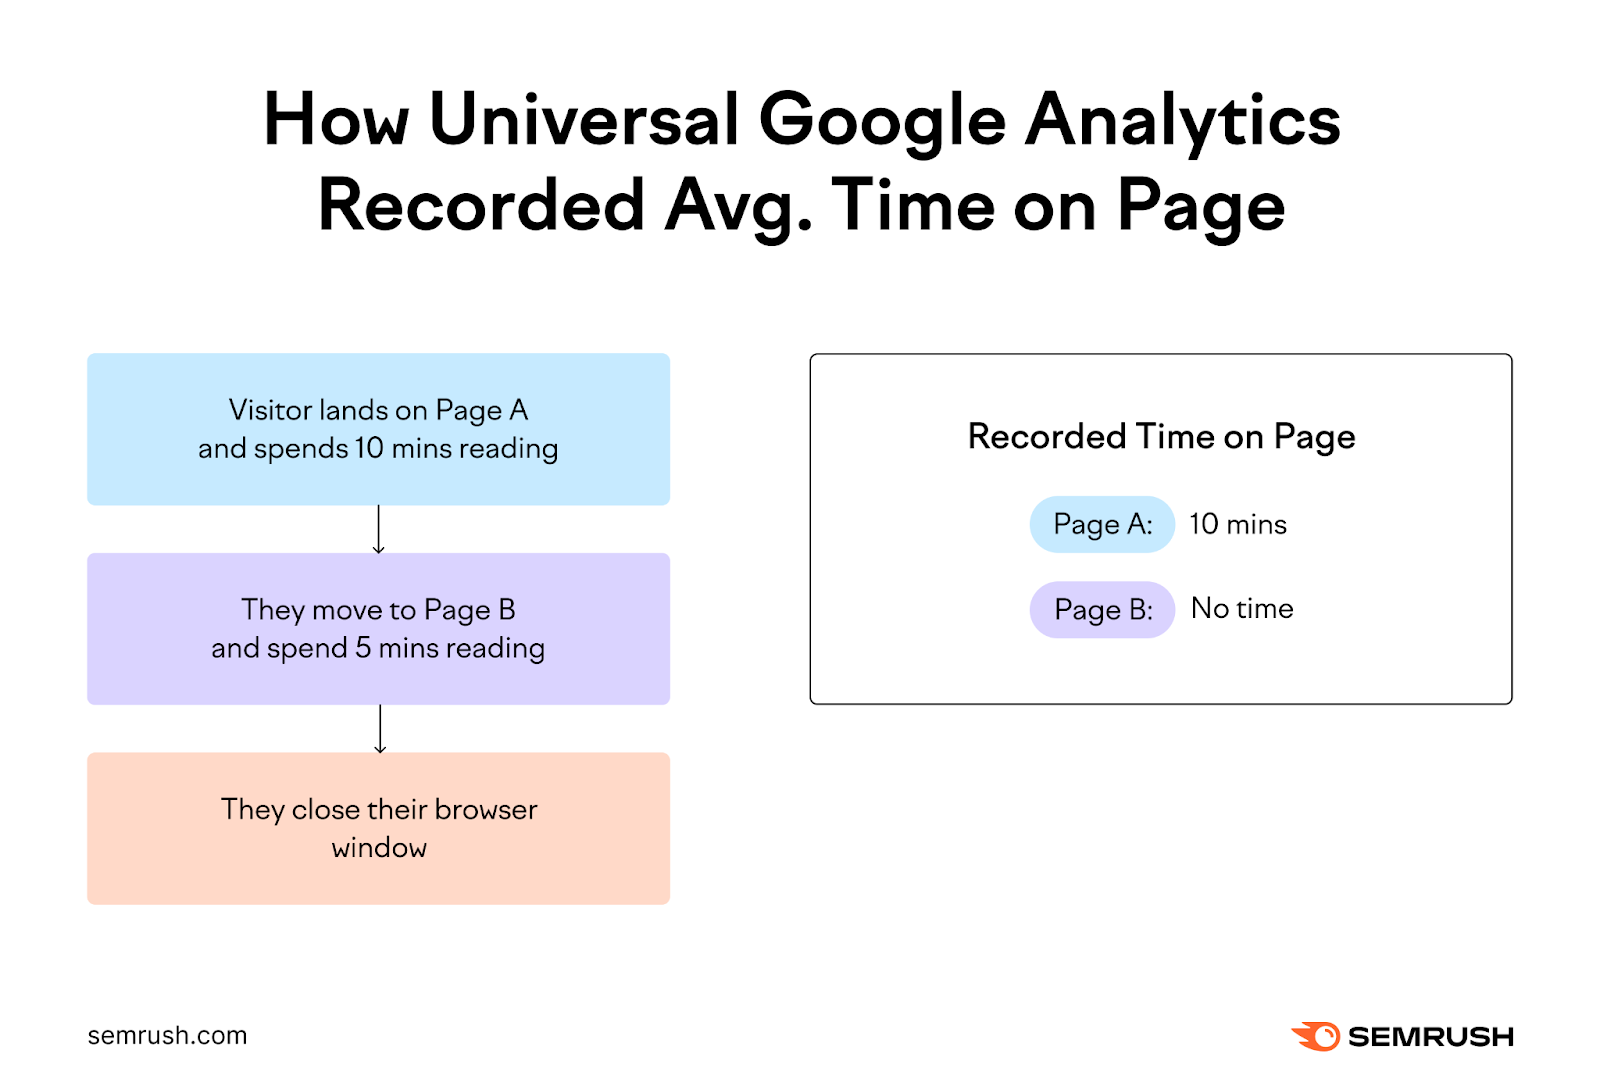 How Universal Google Analytics recorded avg. time on page